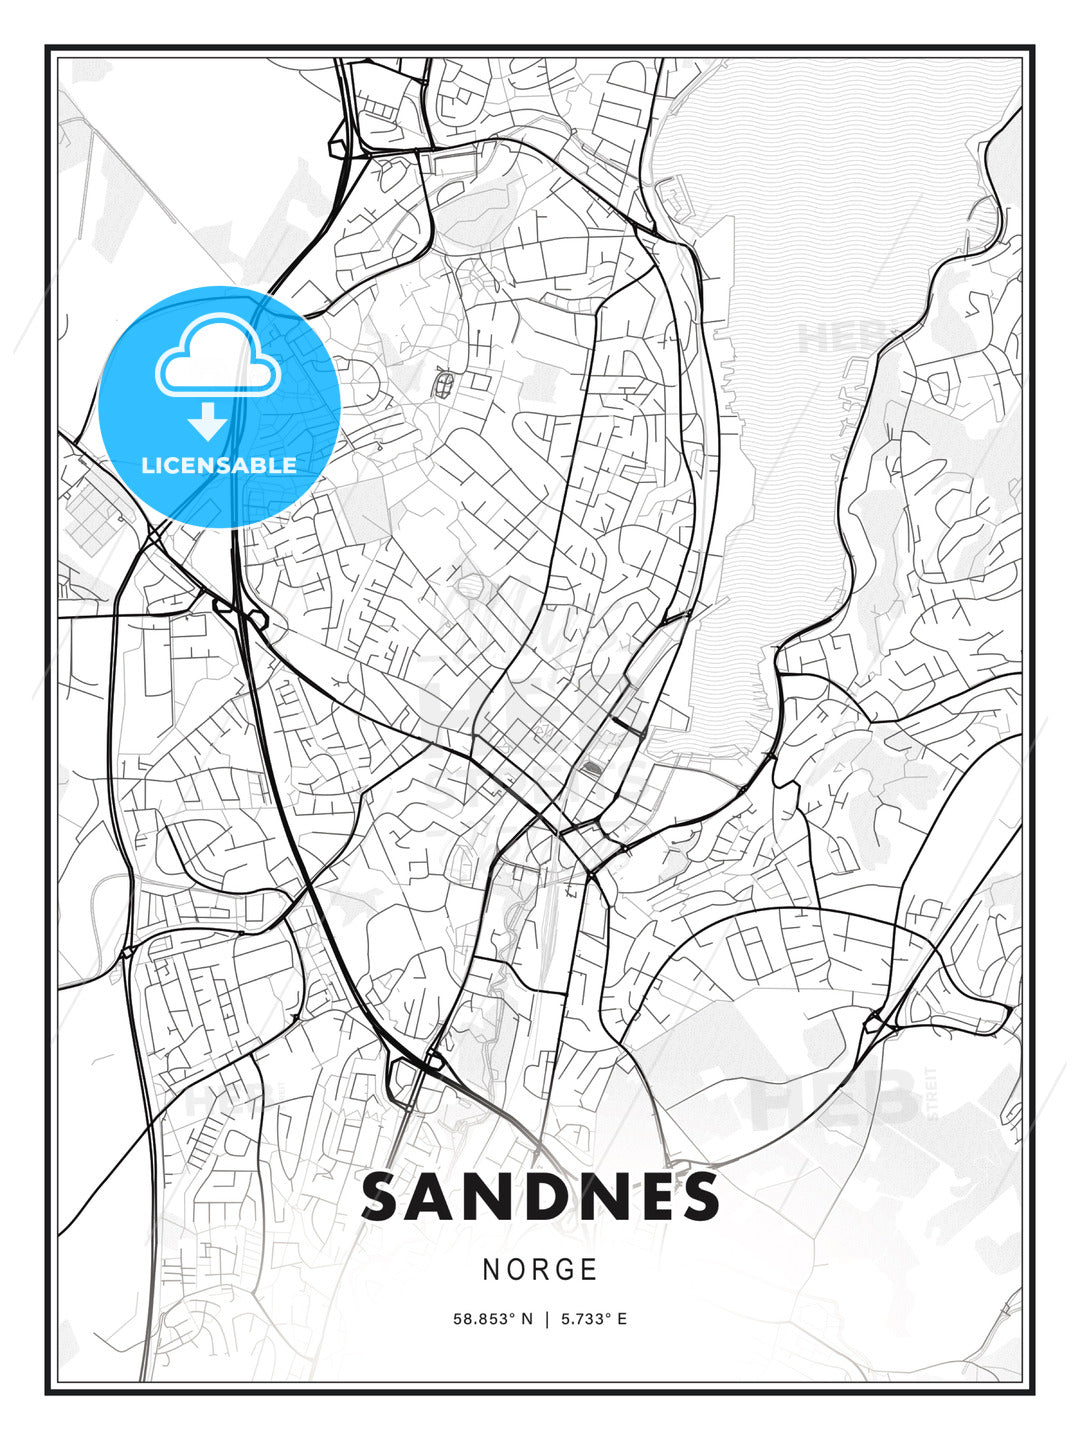 Sandnes, Norway, Modern Print Template in Various Formats - HEBSTREITS Sketches